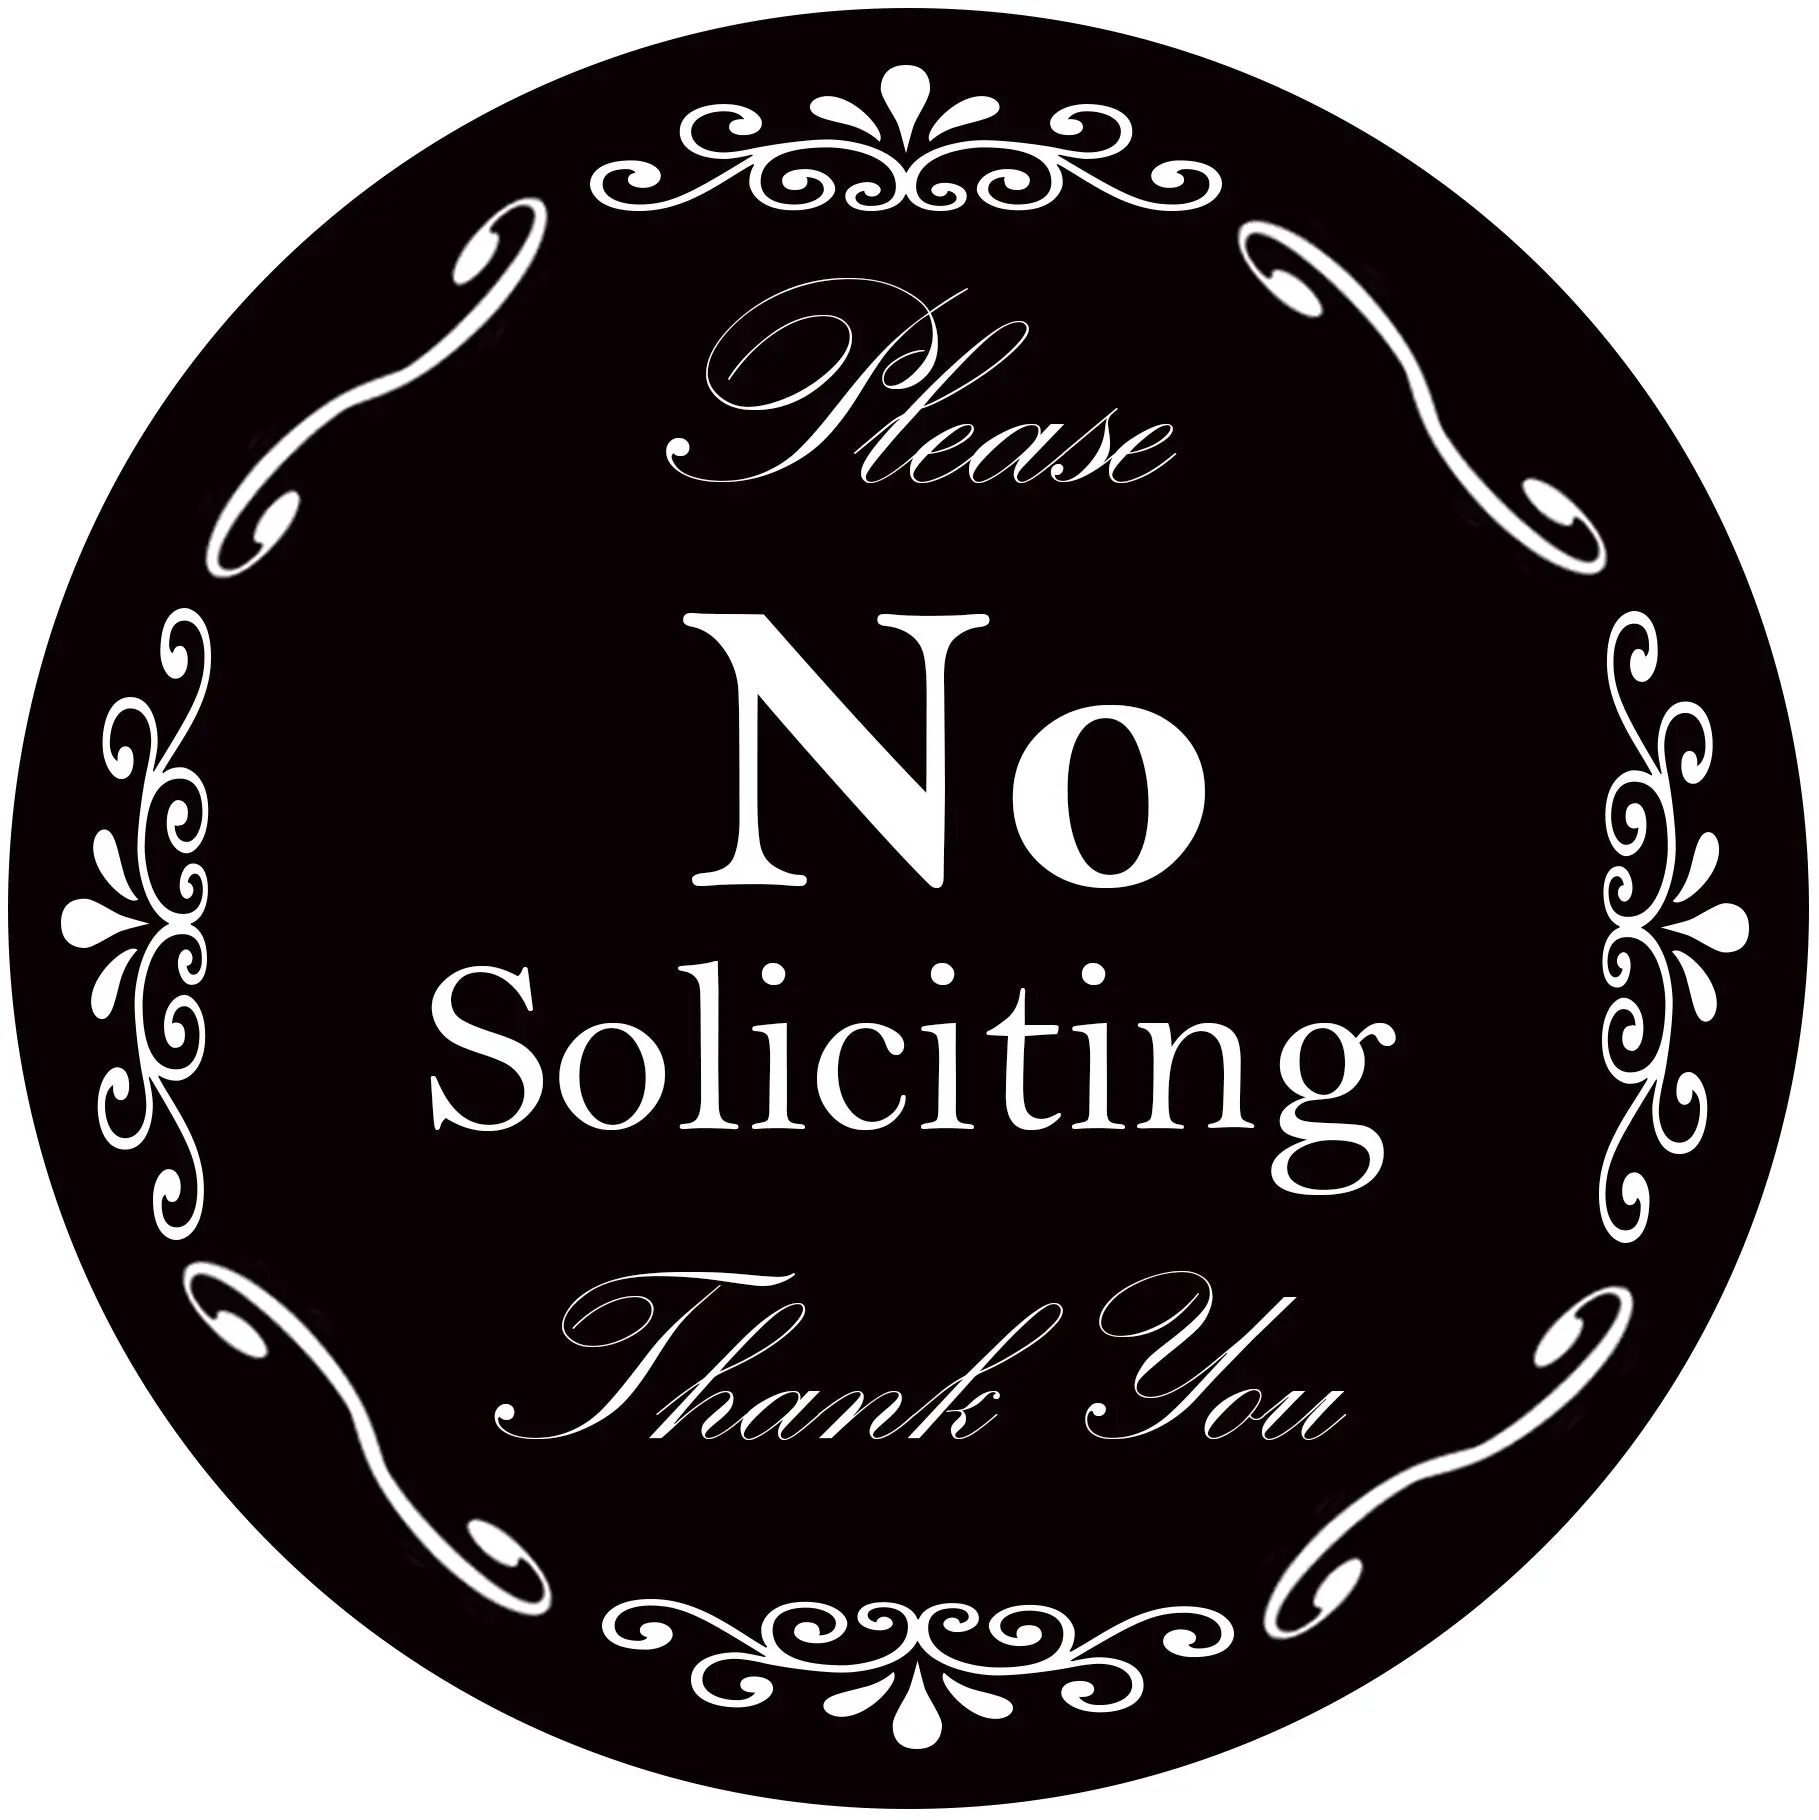 ideas-45-of-no-soliciting-sign-for-house-cfu-vngu6-cheap-printable-no-soliciting-door-sign